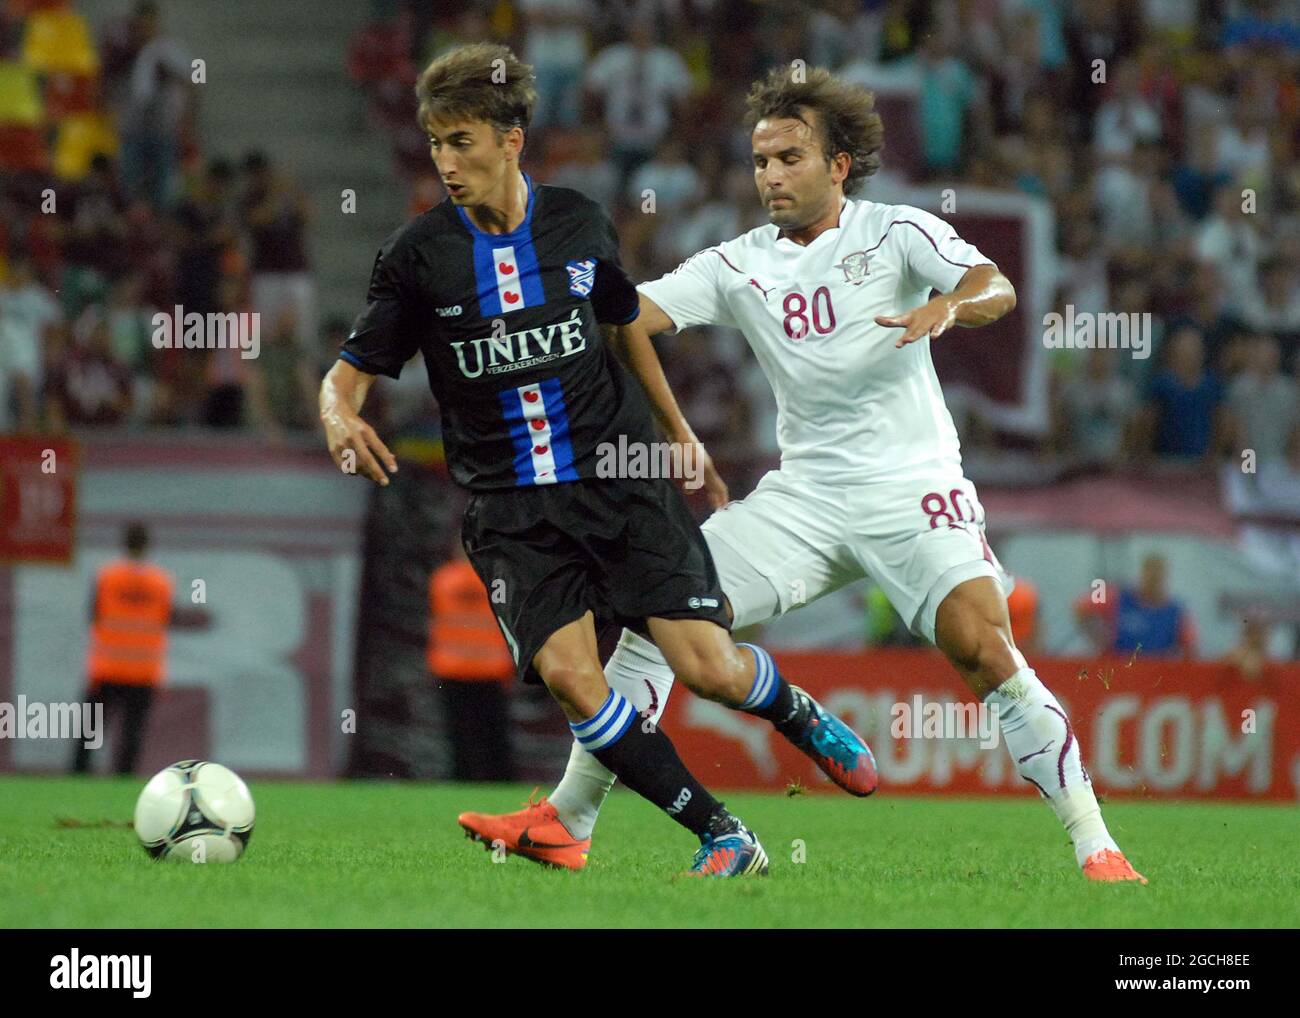 BUCHAREST, ROMANIA - AUGUST 9, 2012: Filip Djuricic (L) of Heerenveen and Filipe Teixeira (R) of Rapid pictured in action during the second leg of the 2012/13 UEFA Europa League Third Qualifying Round game between Rapid Bucuresti and FC Heerenveen at National Arena. Stock Photo